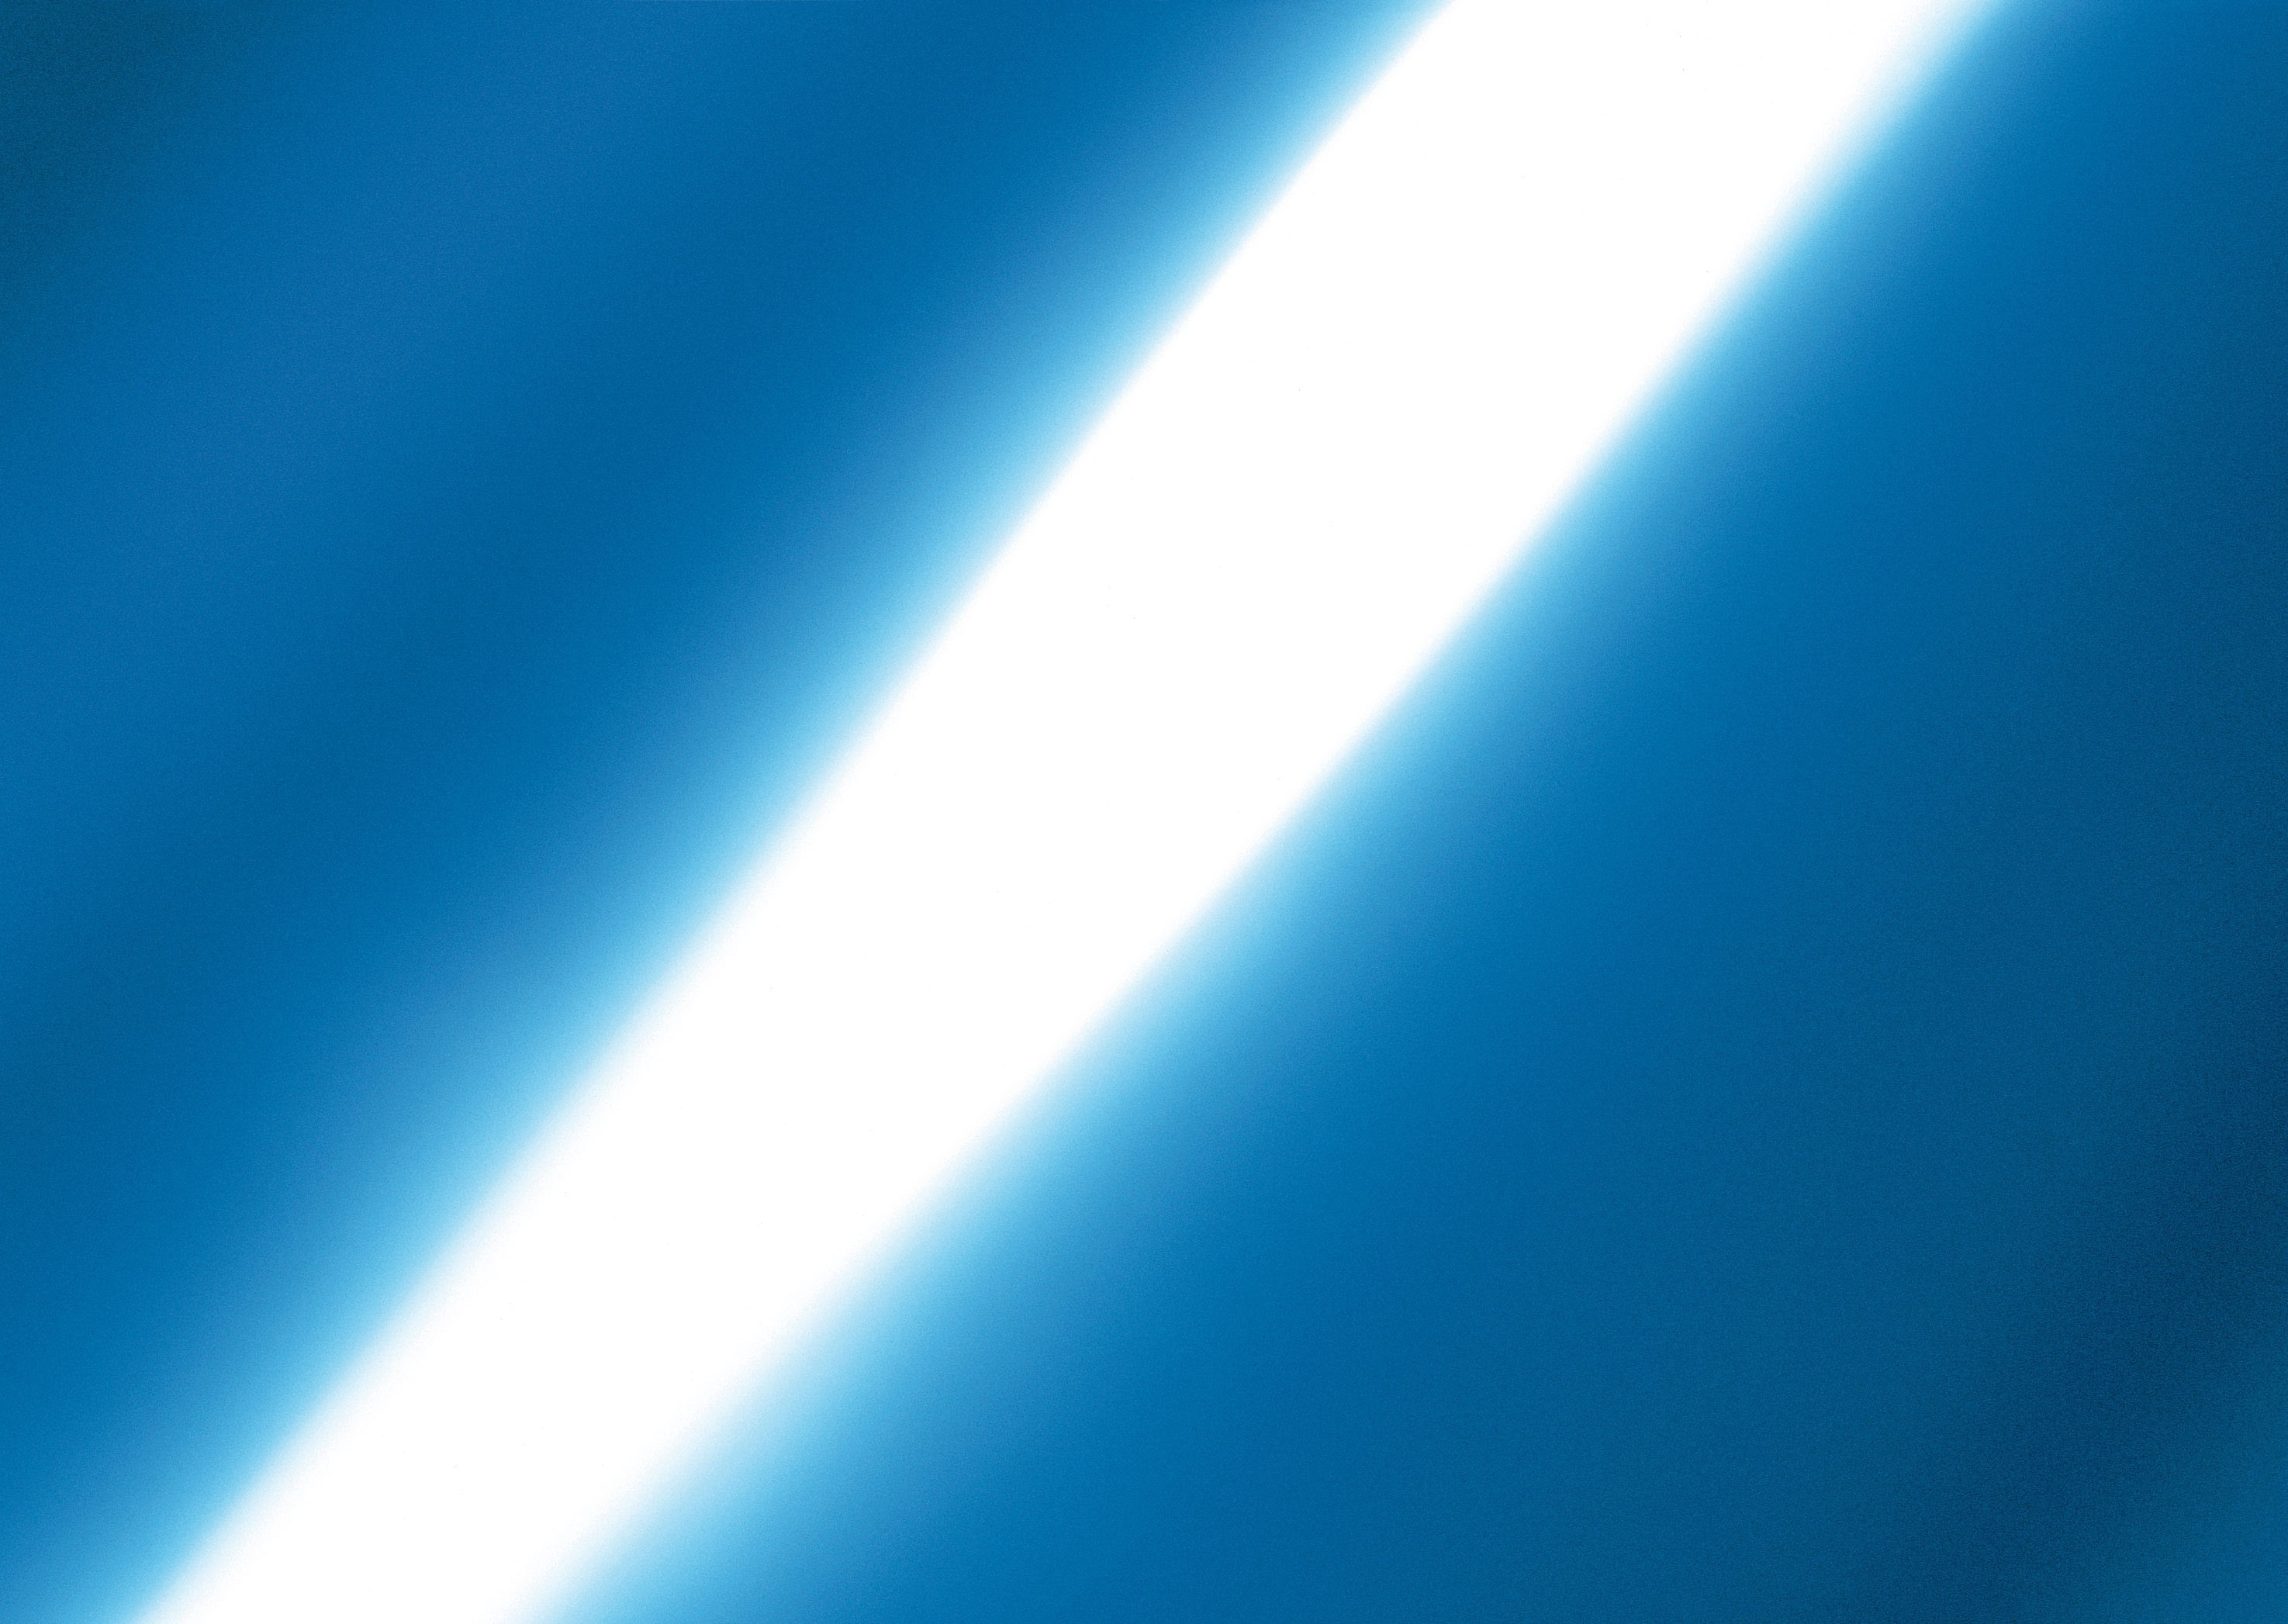 Download wallpaper 2950x2094 ray, line, light, blue, white hd background